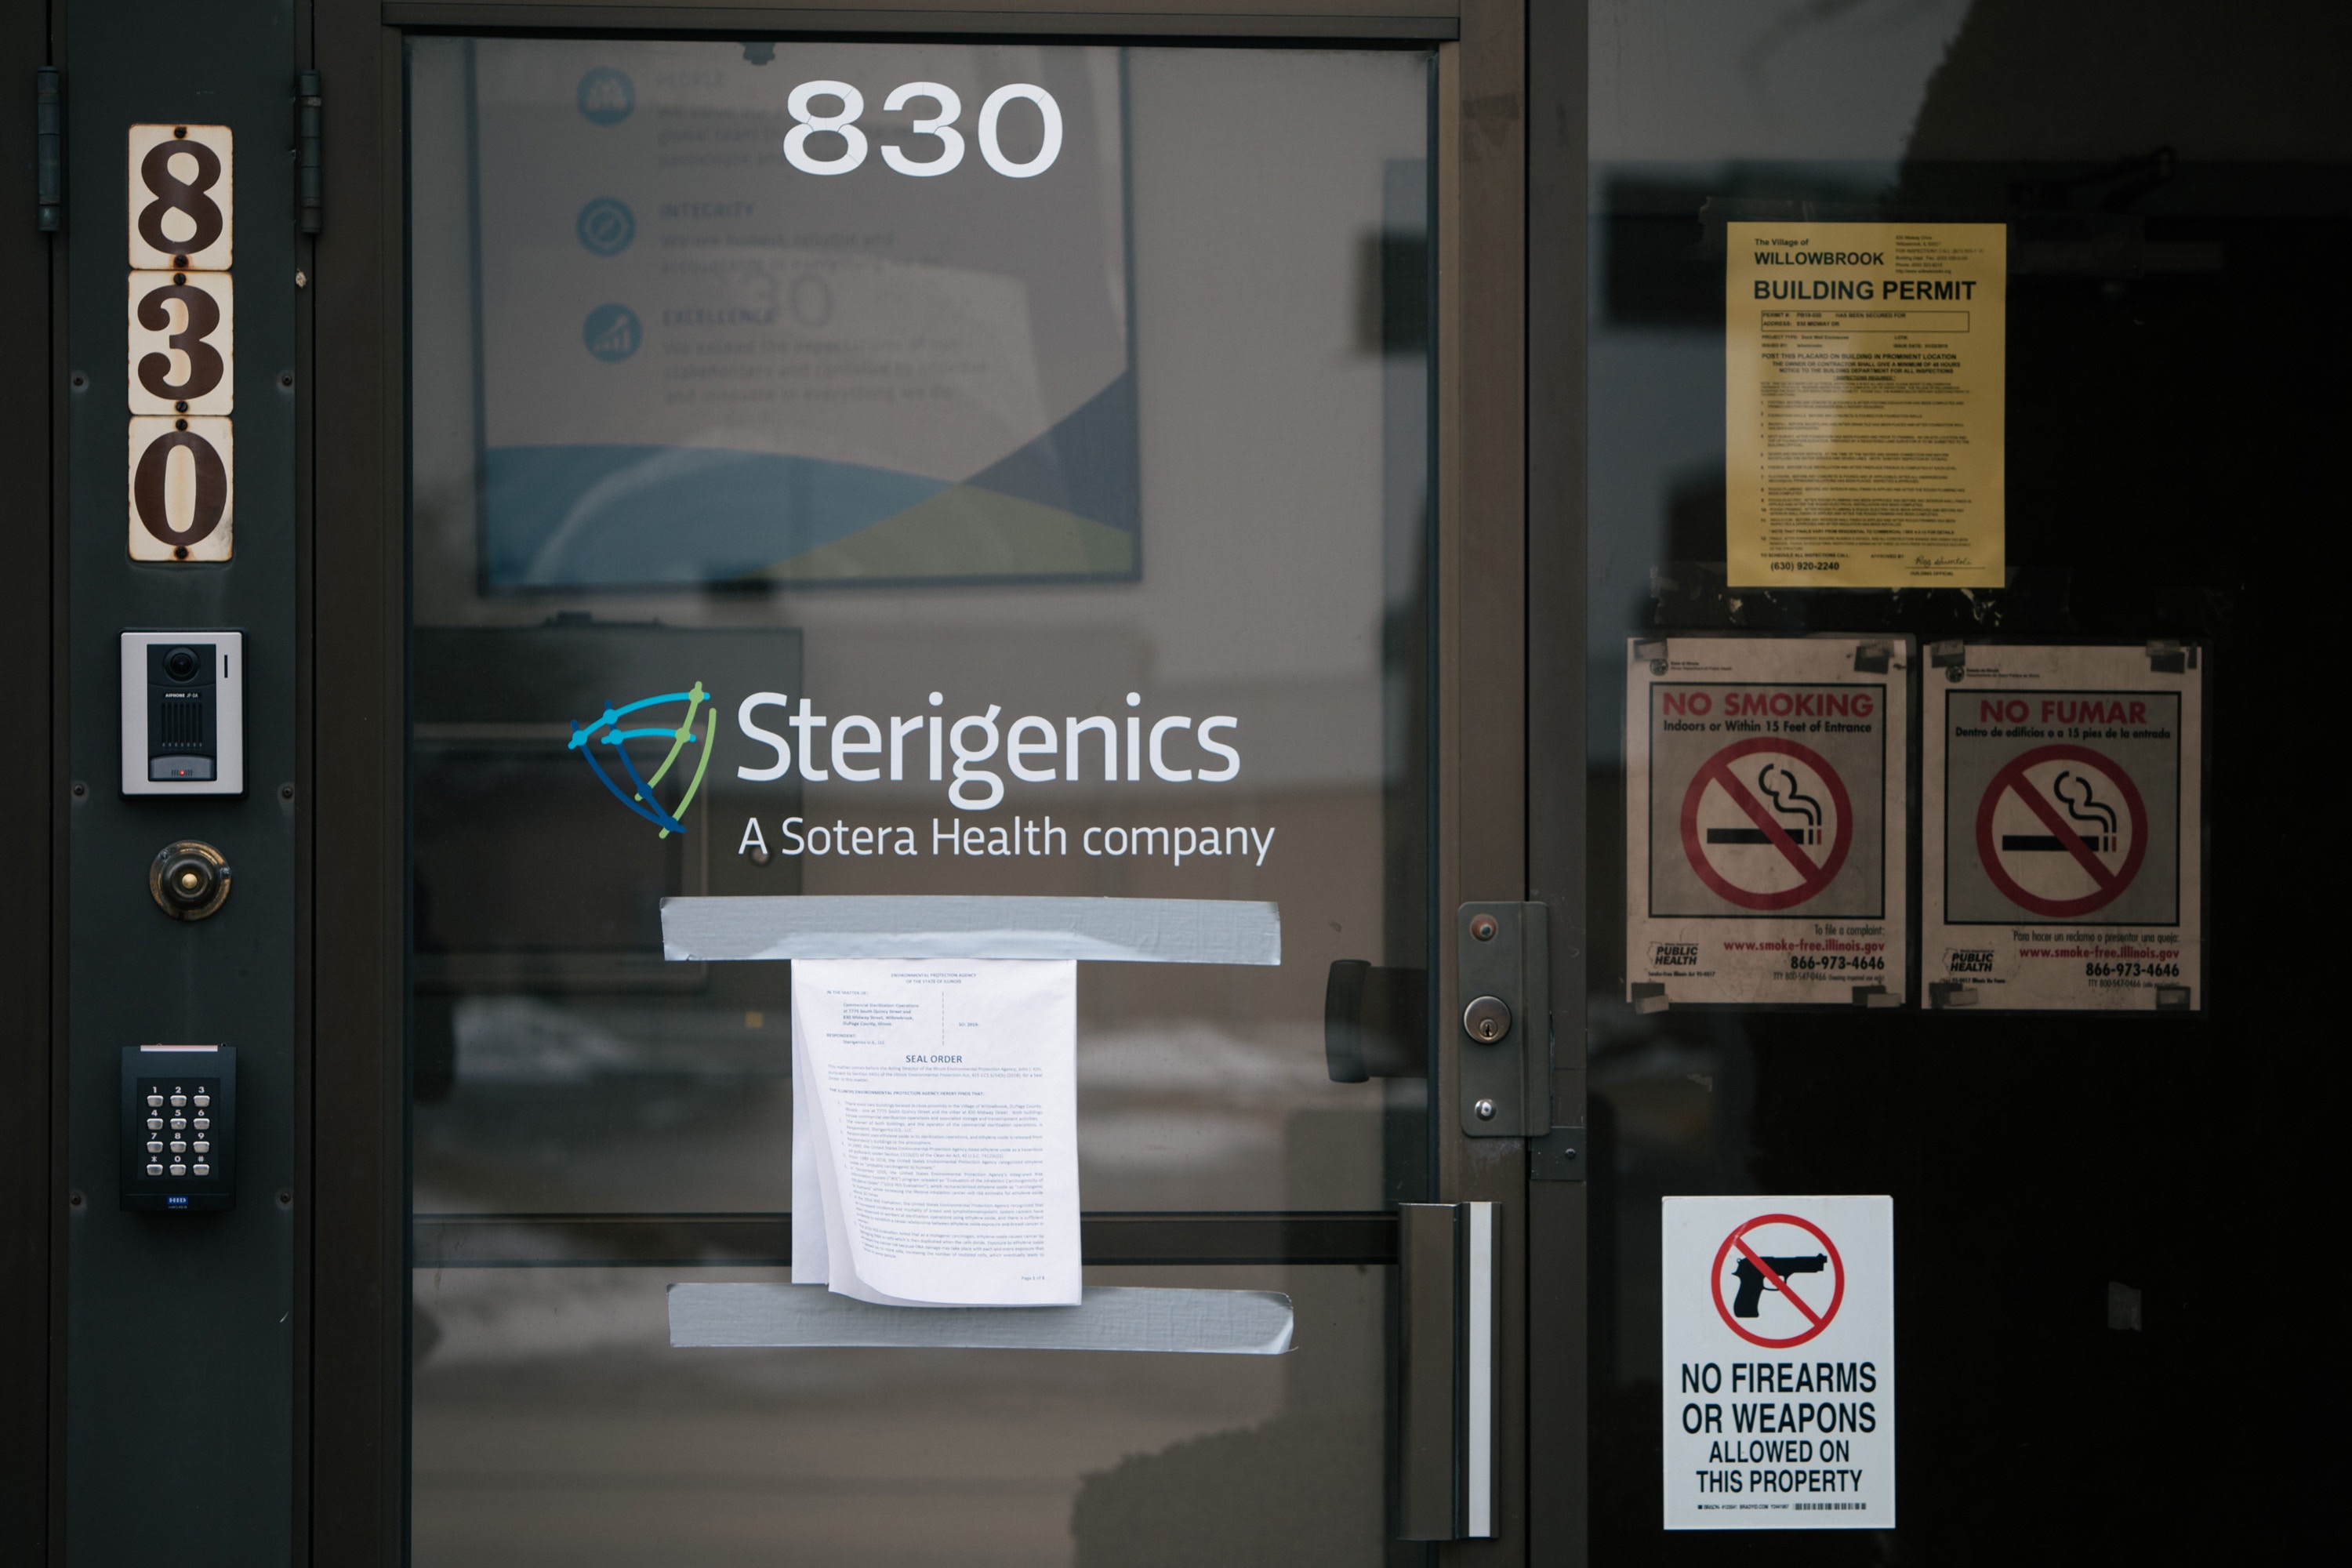 Willowbrook, Illinois -- Thursday, February 22, 2019. A seal order from the Environmental Protection Agency of the state of Illinois is duct taped to every outside door at the Sterigenics plant, which has been emitting a carcinogenic chemical called ethylene oxide. One of the buildings is about 0.2-miles away from homes in Willowbrook. CREDIT: Alyssa Schukar for The Intercept